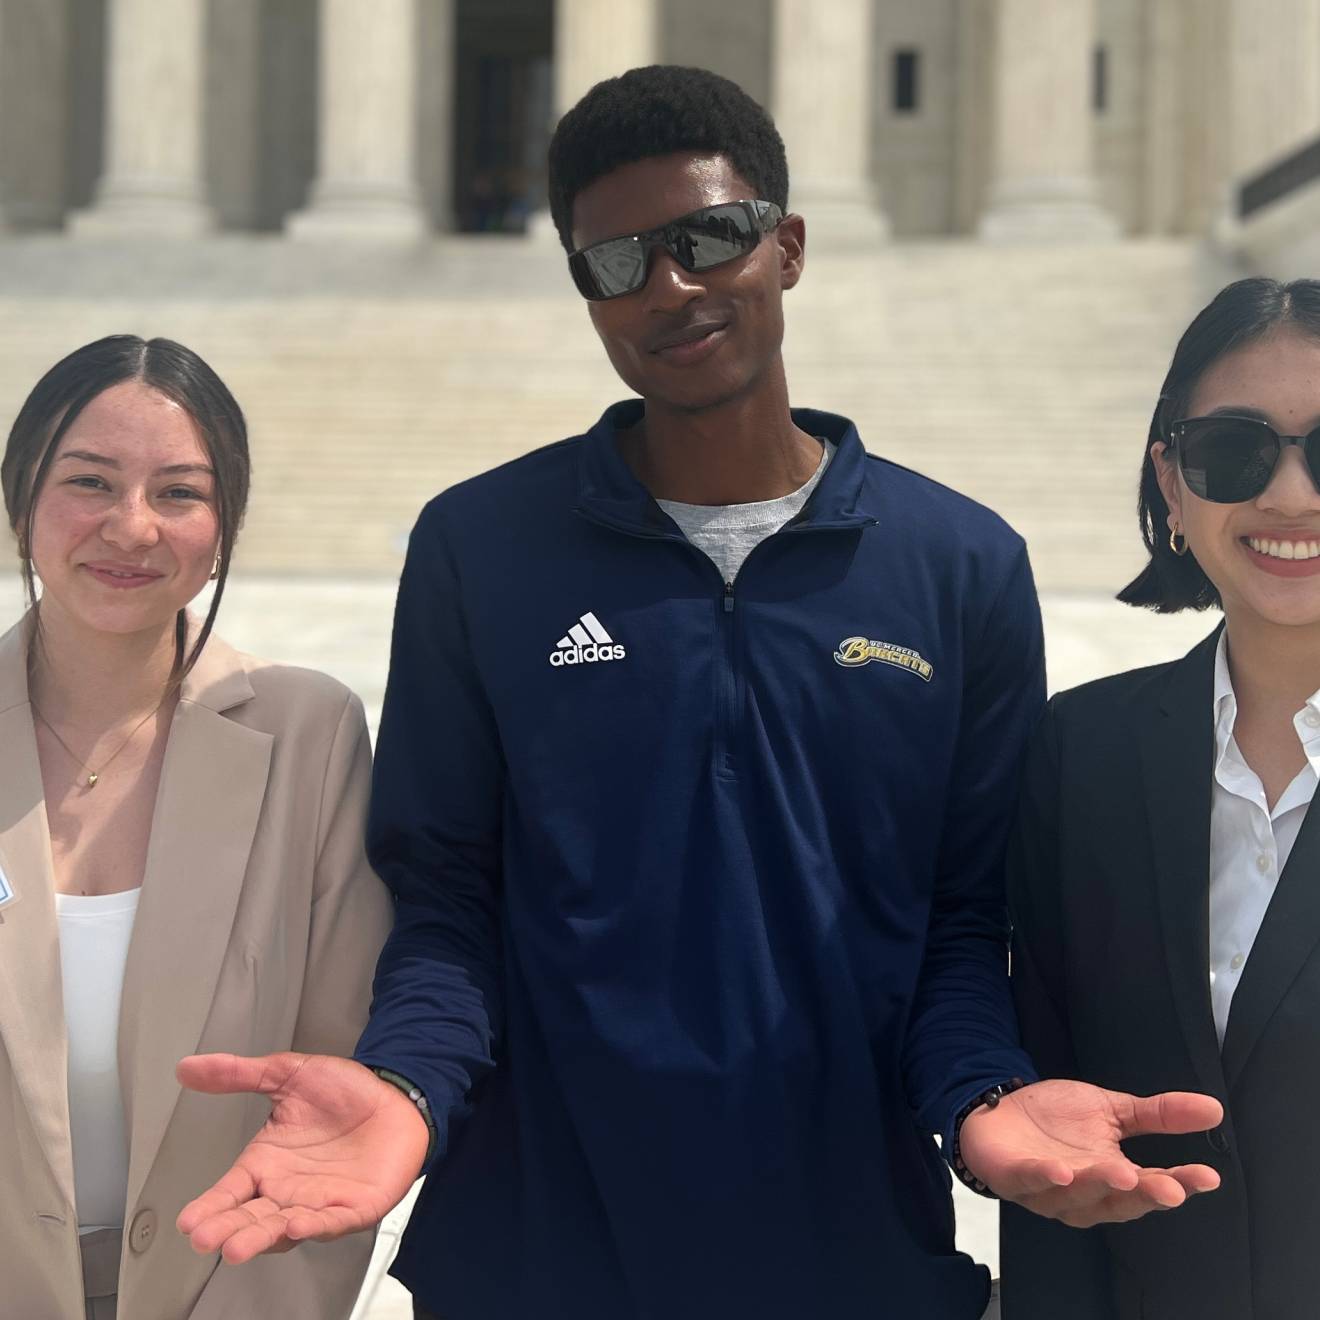 3 UCAN student ambassadors in business attire smile in front of the Capitol Building